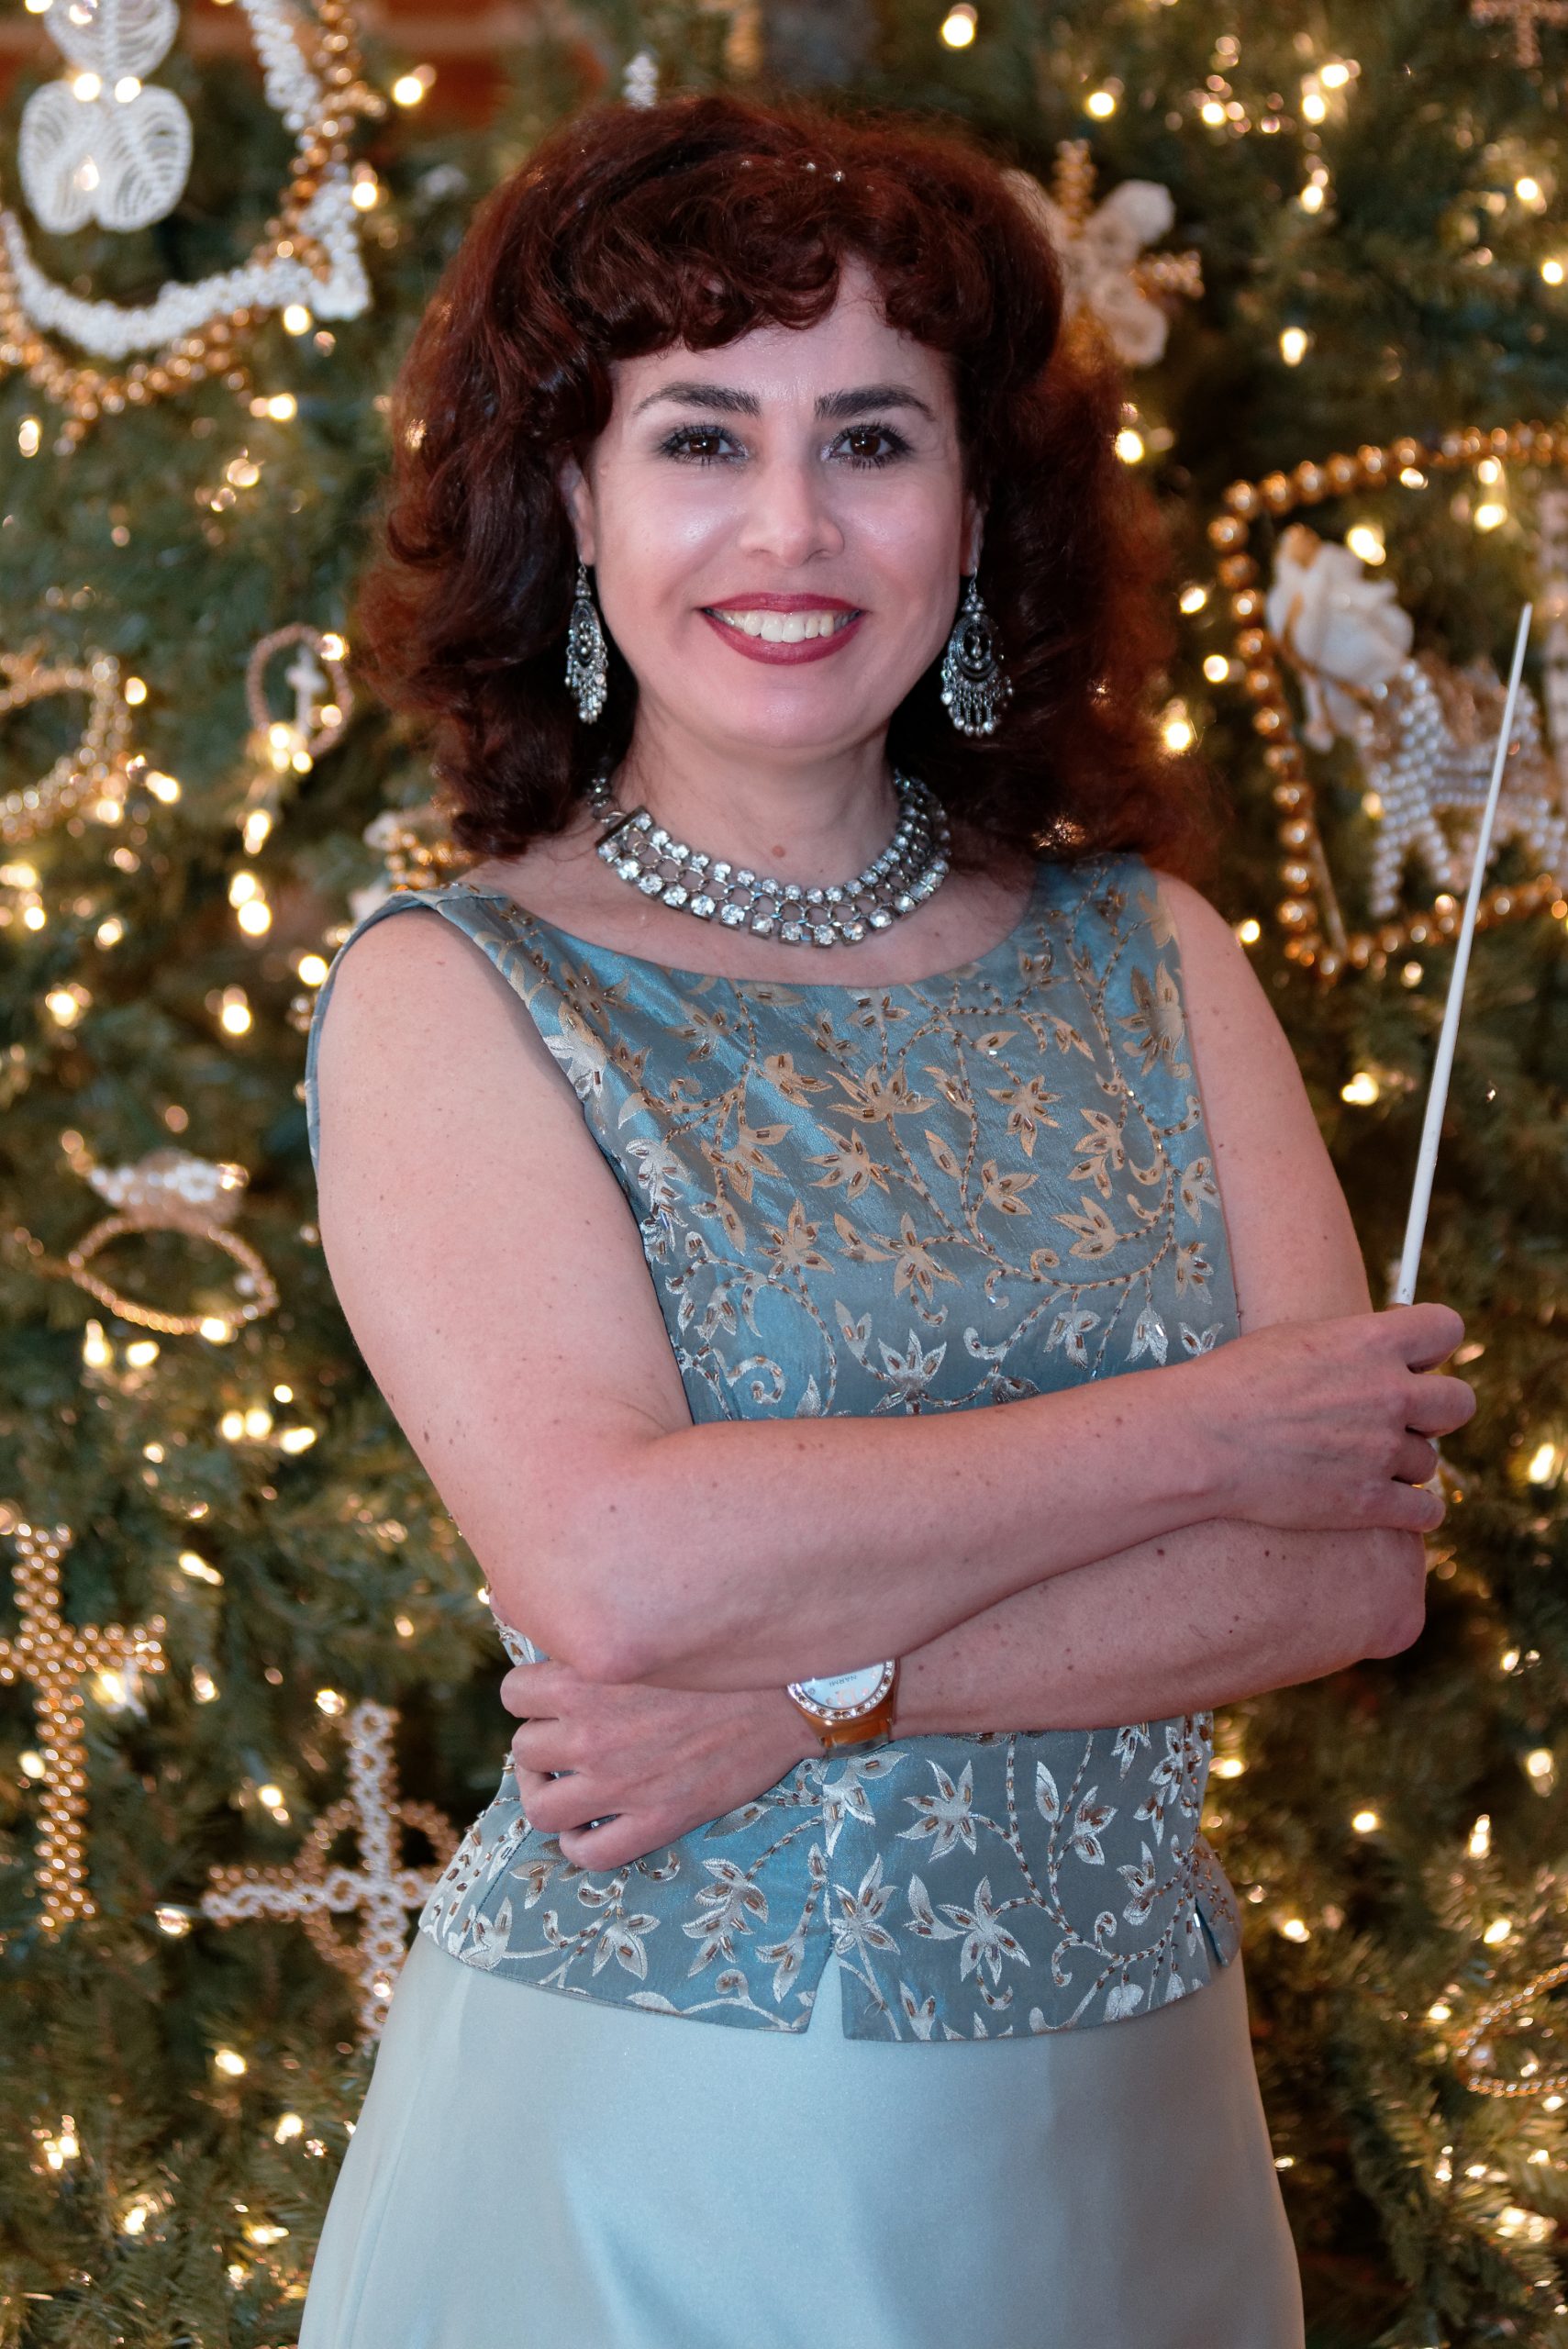 Suzanna had a period of creative soul-searching that yielded Ensemble Eclectica and Palmetto Chamber Orchestra, of which she is founder and artistic and music director. Both were founded in 2015. Suzanna, after performing an annual concert Columbia Celebrates! with Palmetto Chamber Orchestra, Dec. 21, 2020. Photography courtesy of Dimitry Pavlovsky